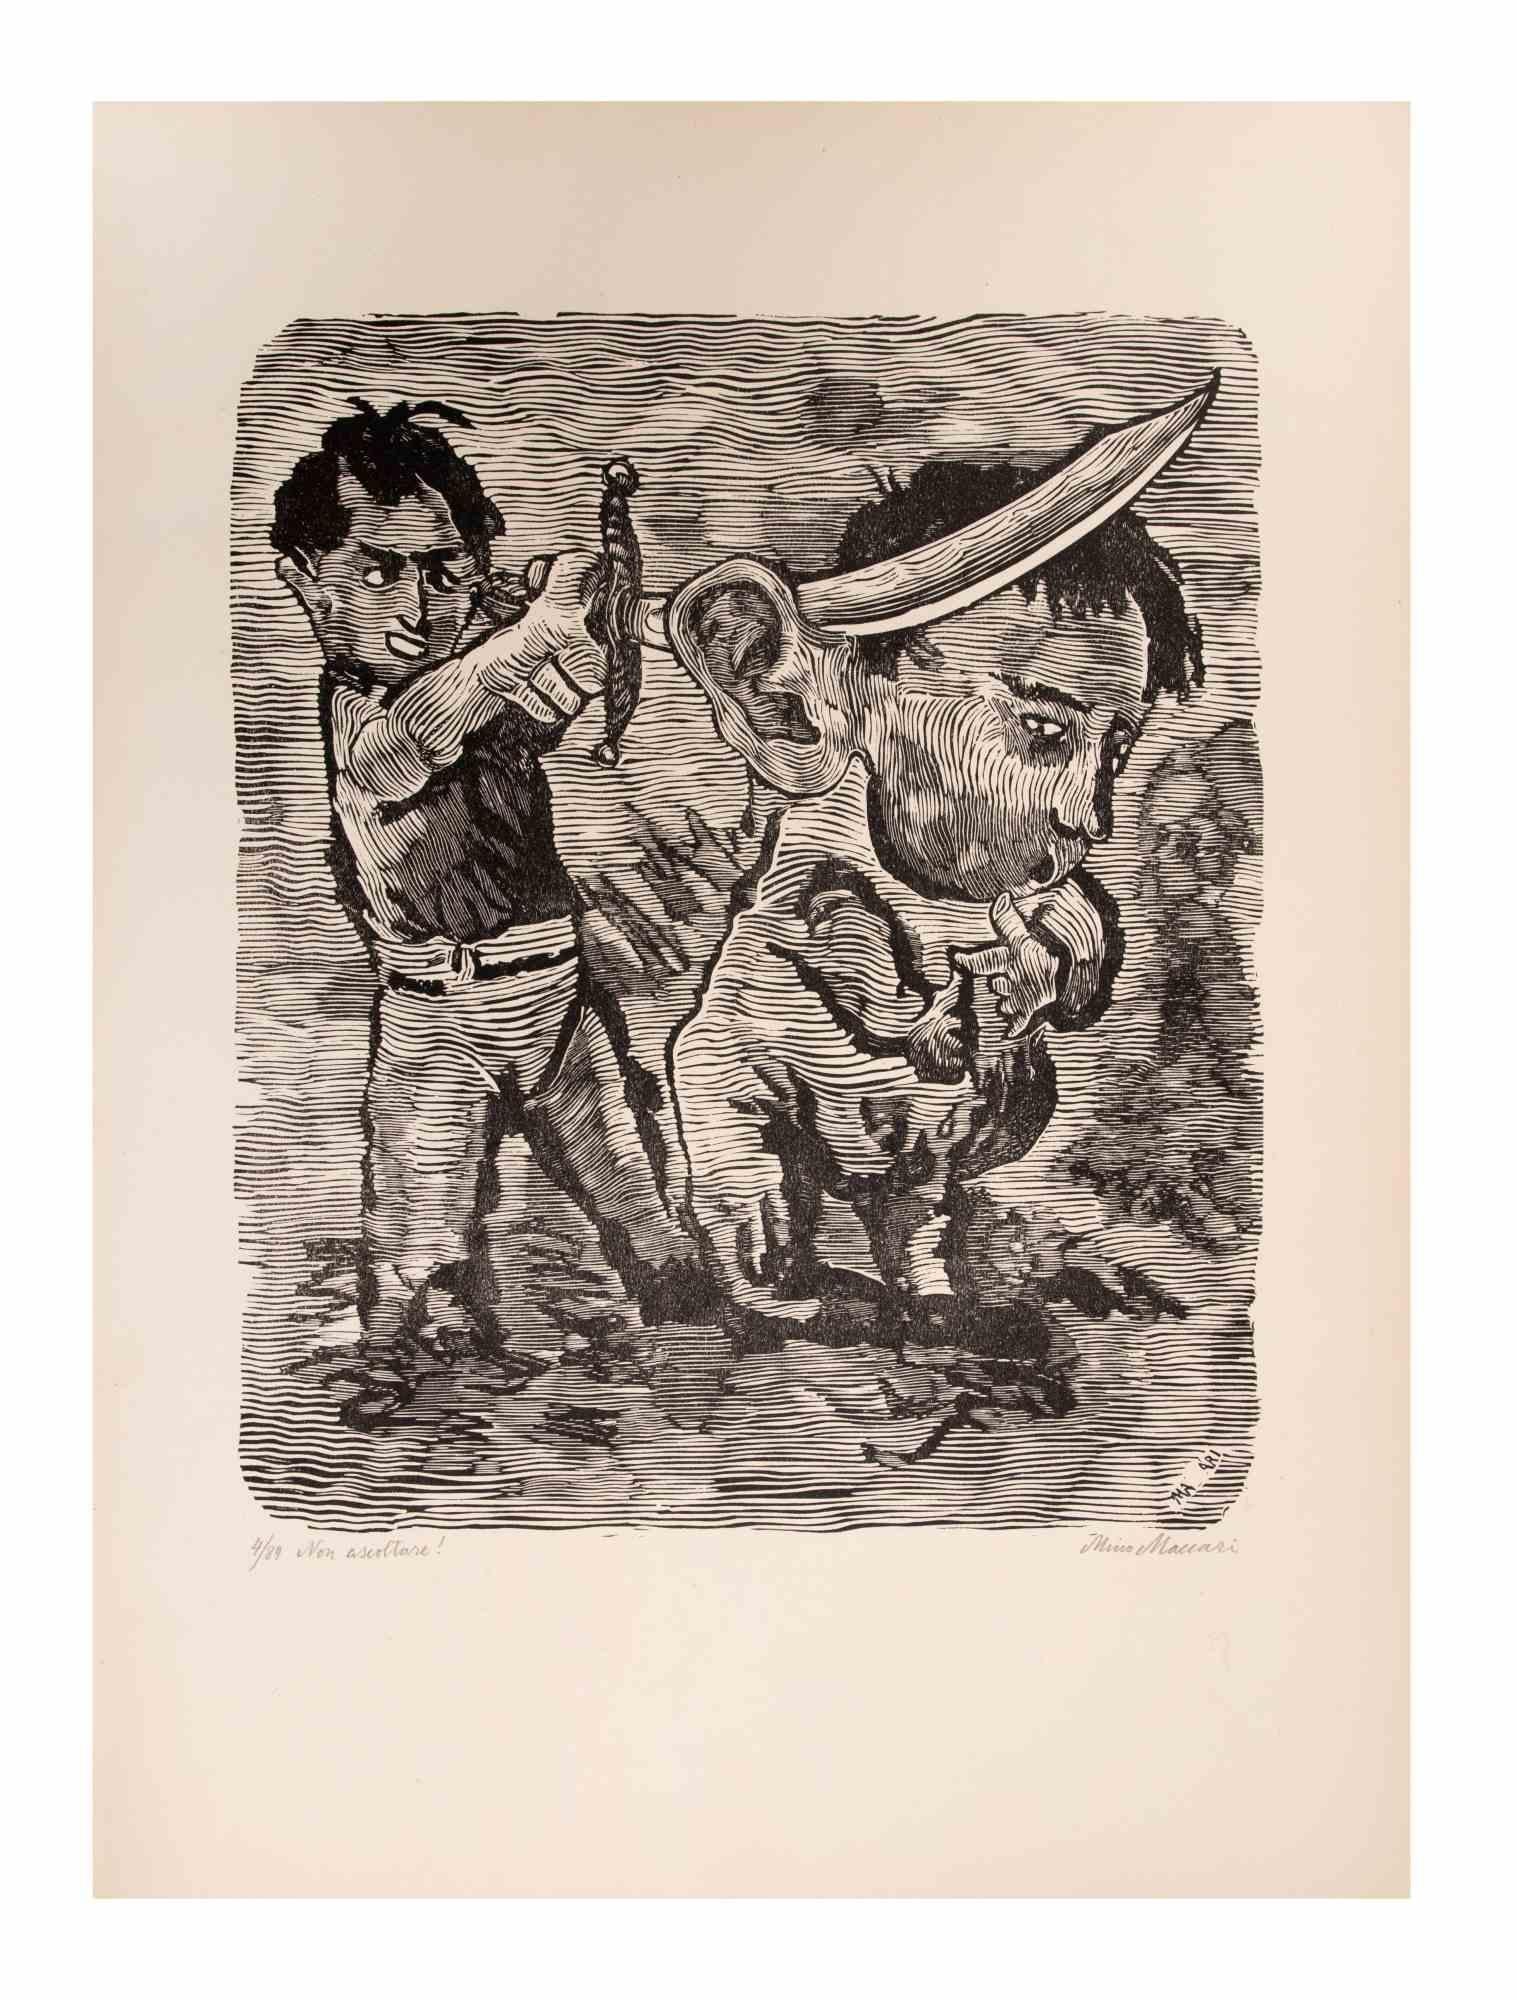 Don't listen! (Non ascoltare!) is an Artwork realized by Mino Maccari  (1924-1989) in the Mid-20th Century.

B./W.  woodcut on paper. Hand-signed on the lower, numbered 4/89 specimens and titled on the left margin.

Good conditions.

Mino Maccari